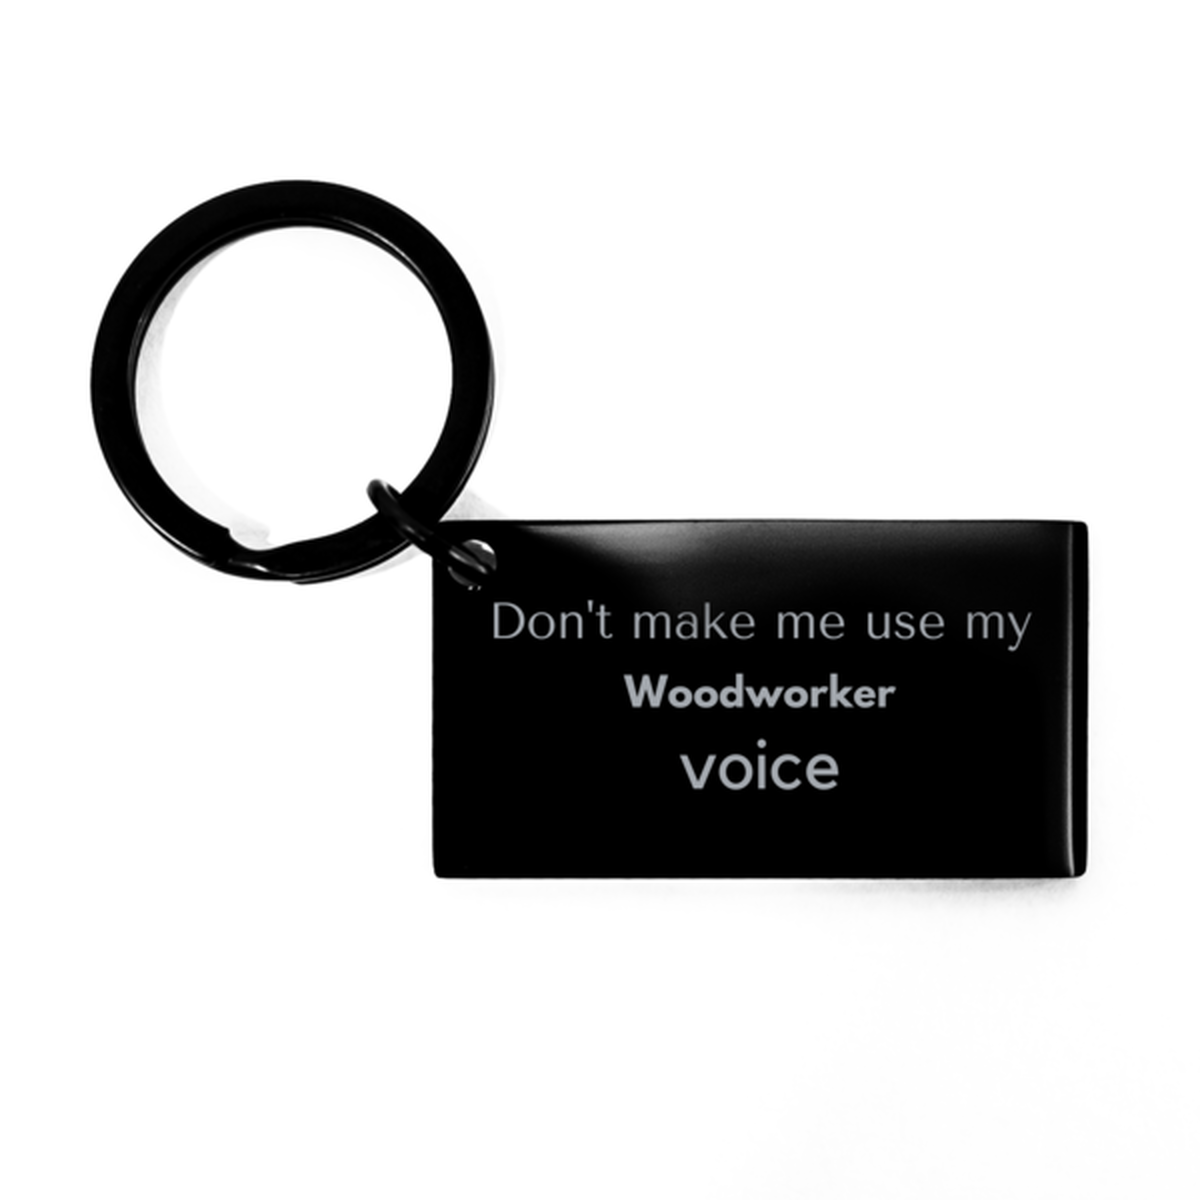 Don't make me use my Woodworker voice, Sarcasm Woodworker Gifts, Christmas Woodworker Keychain Birthday Unique Gifts For Woodworker Coworkers, Men, Women, Colleague, Friends